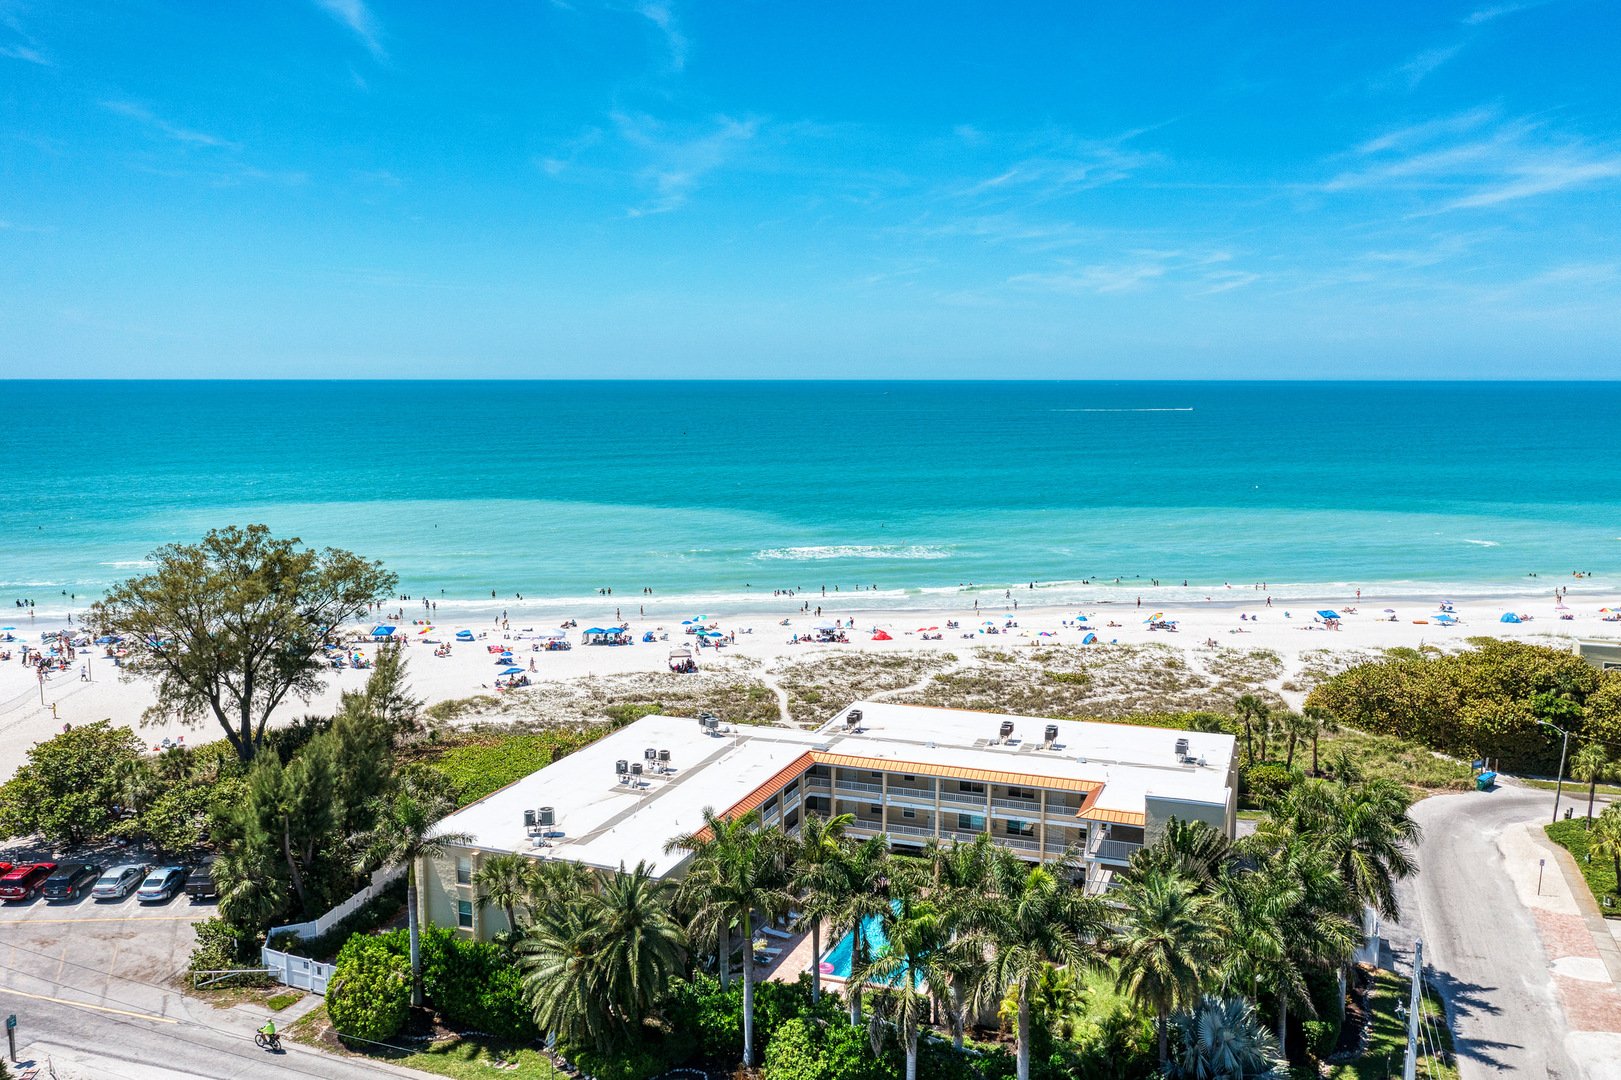 Enjoy the views from our Holmes Beach vacation rentals on the beachfront.